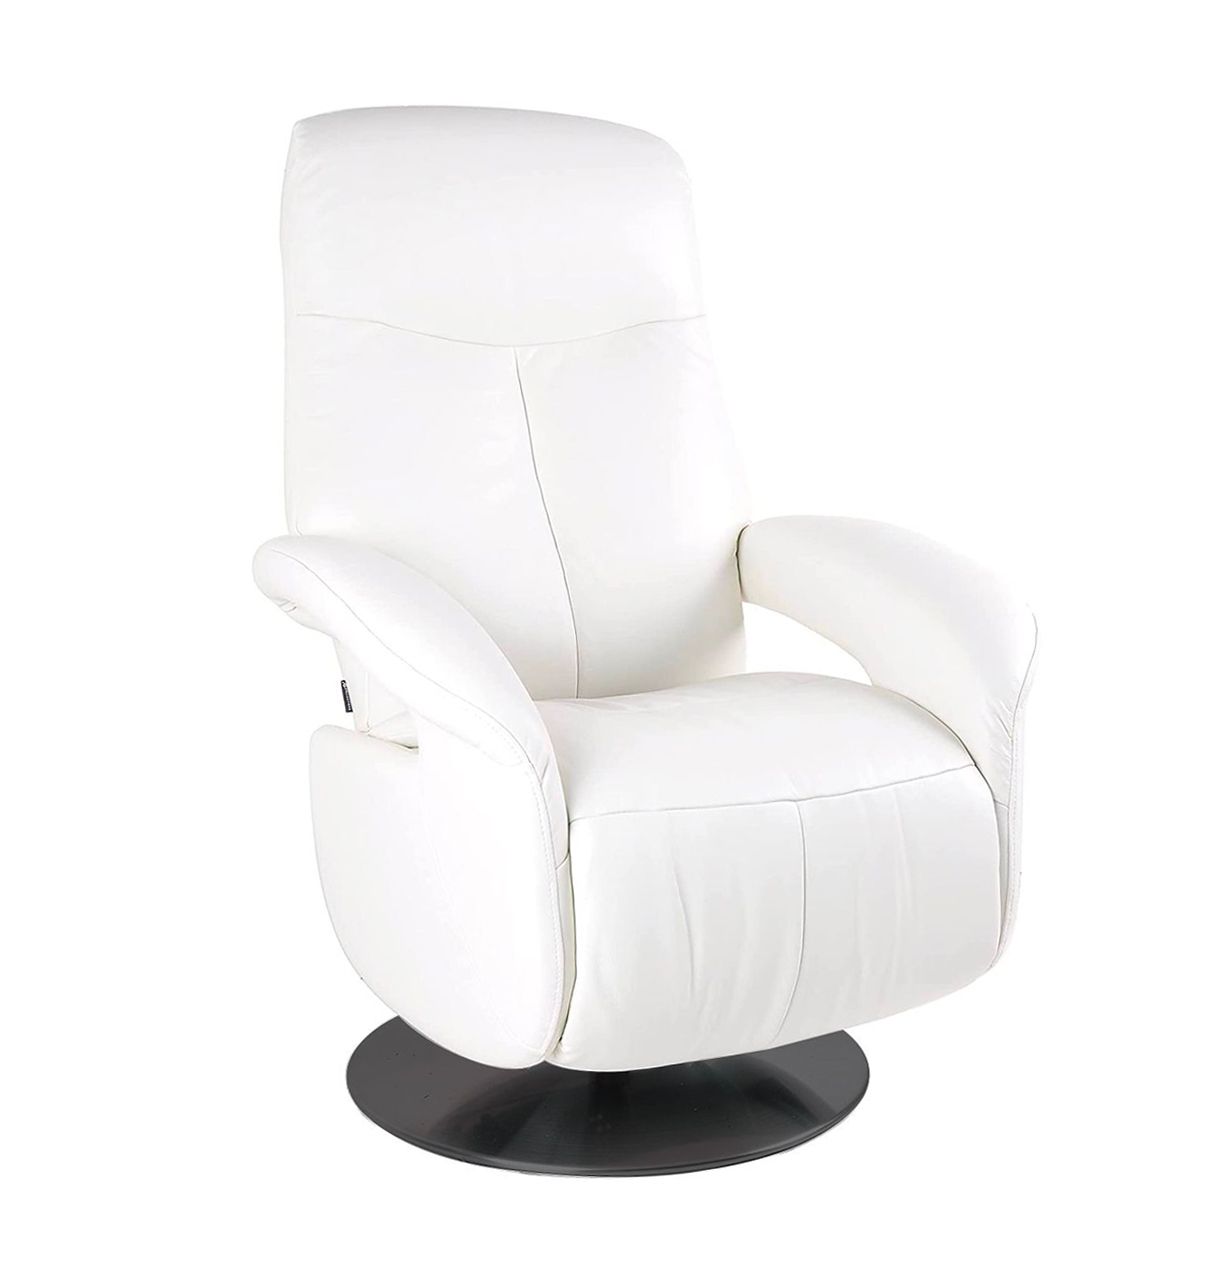 Manual Relaxation Armchair - Leather and Microstar - THARROS